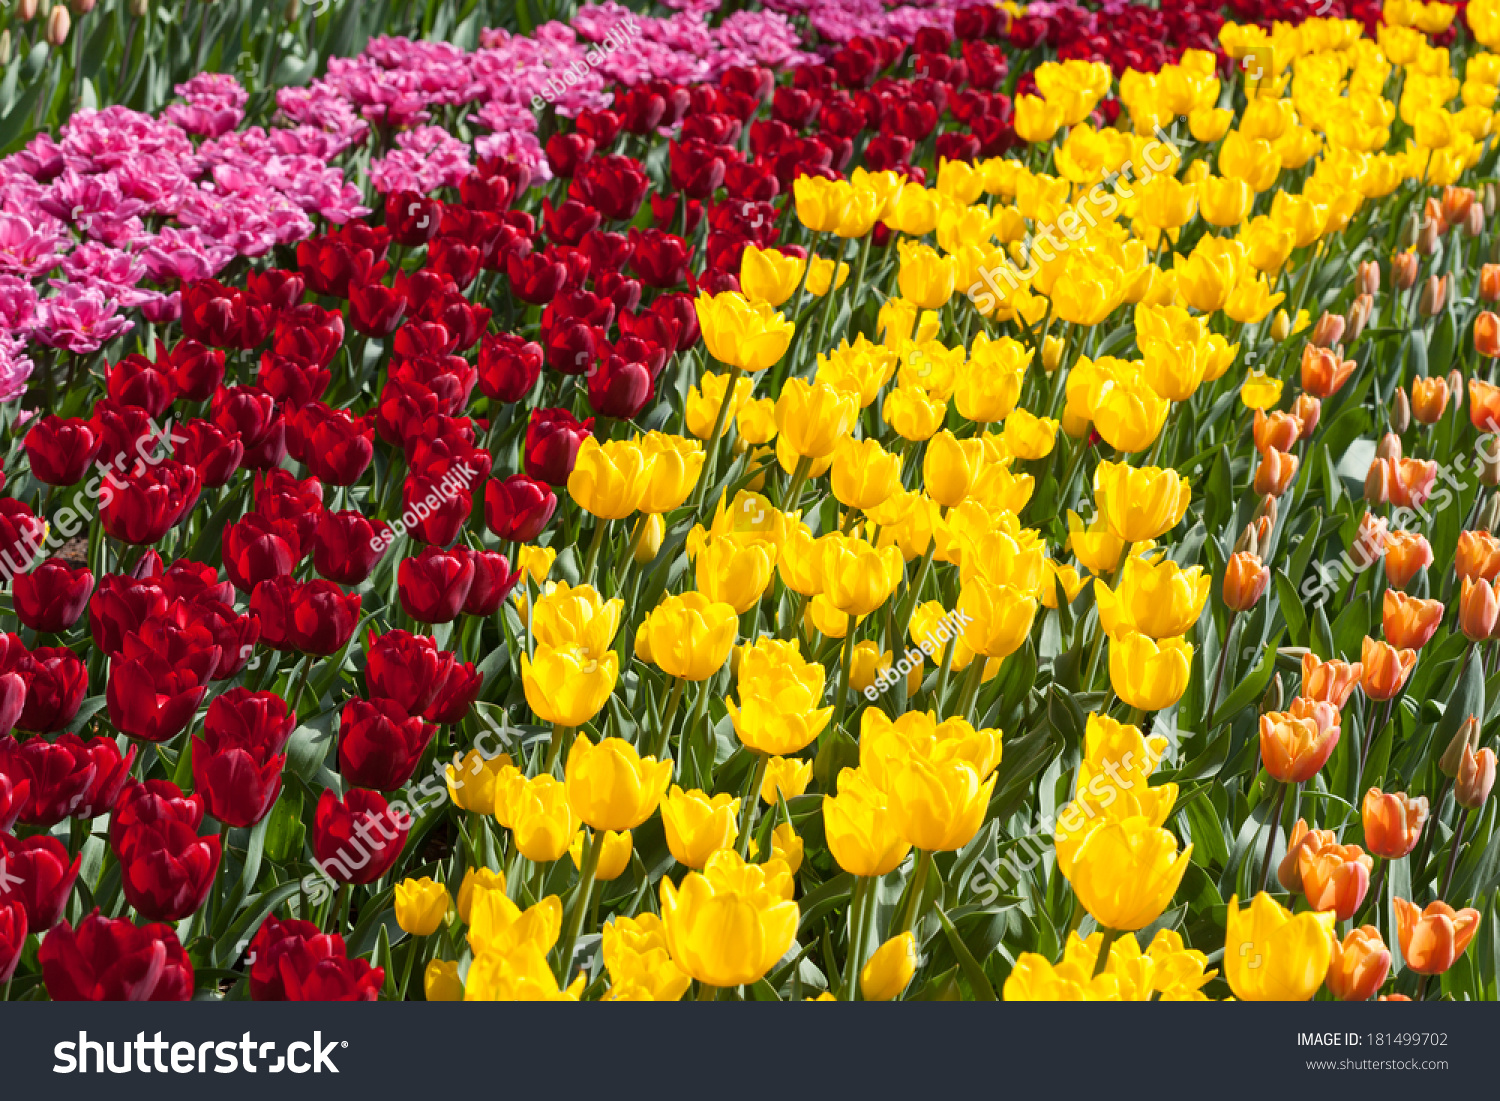 Row of multiple colored flowers in a bright sunny day in The Netherlands #181499702